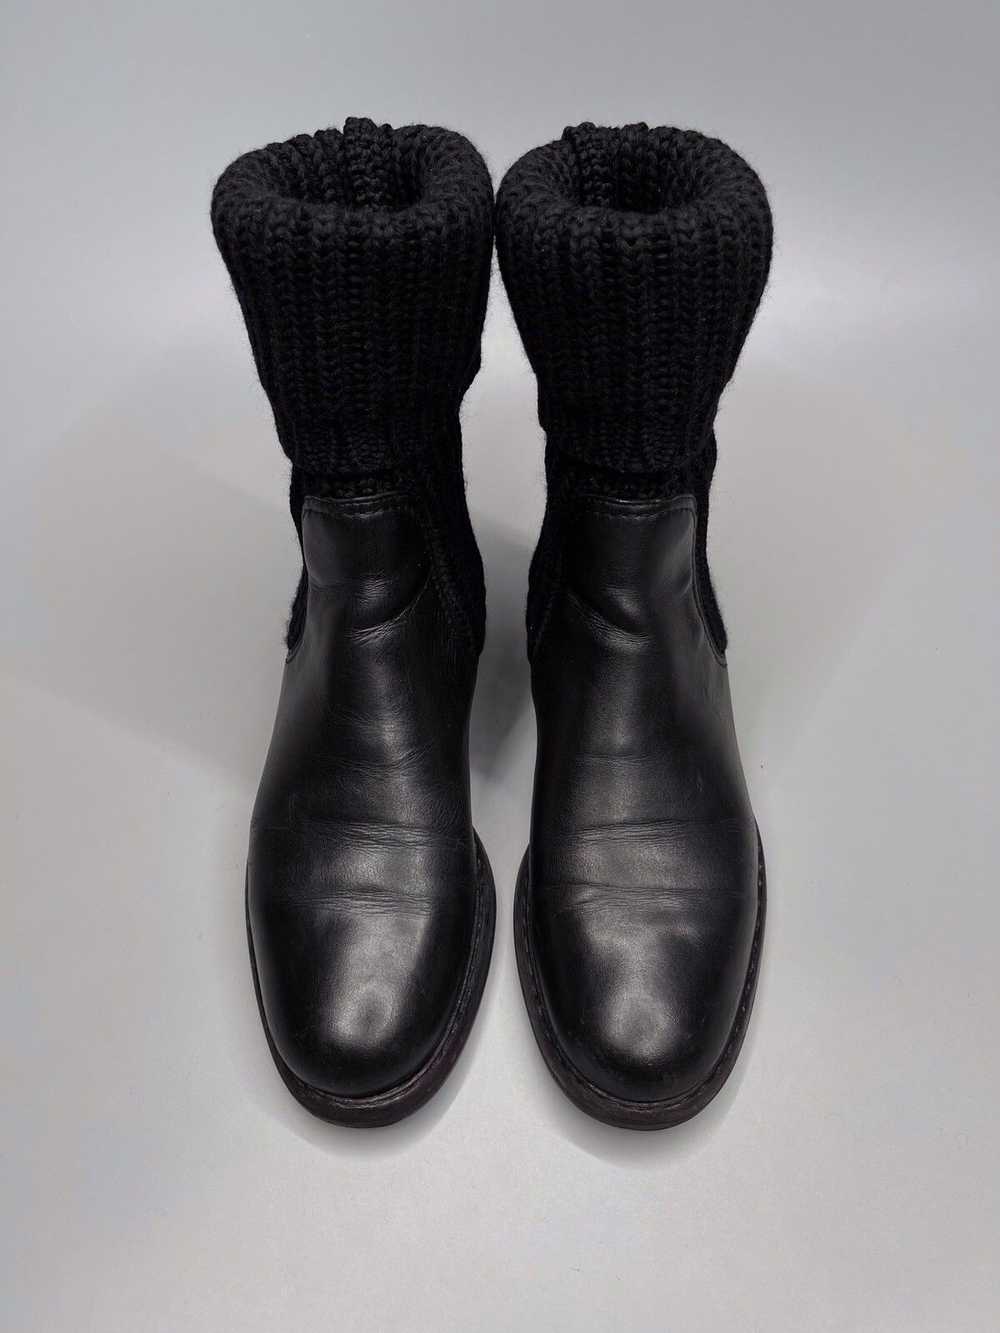 Gucci Vintage Gucci Sweaters Leather Boots - image 4